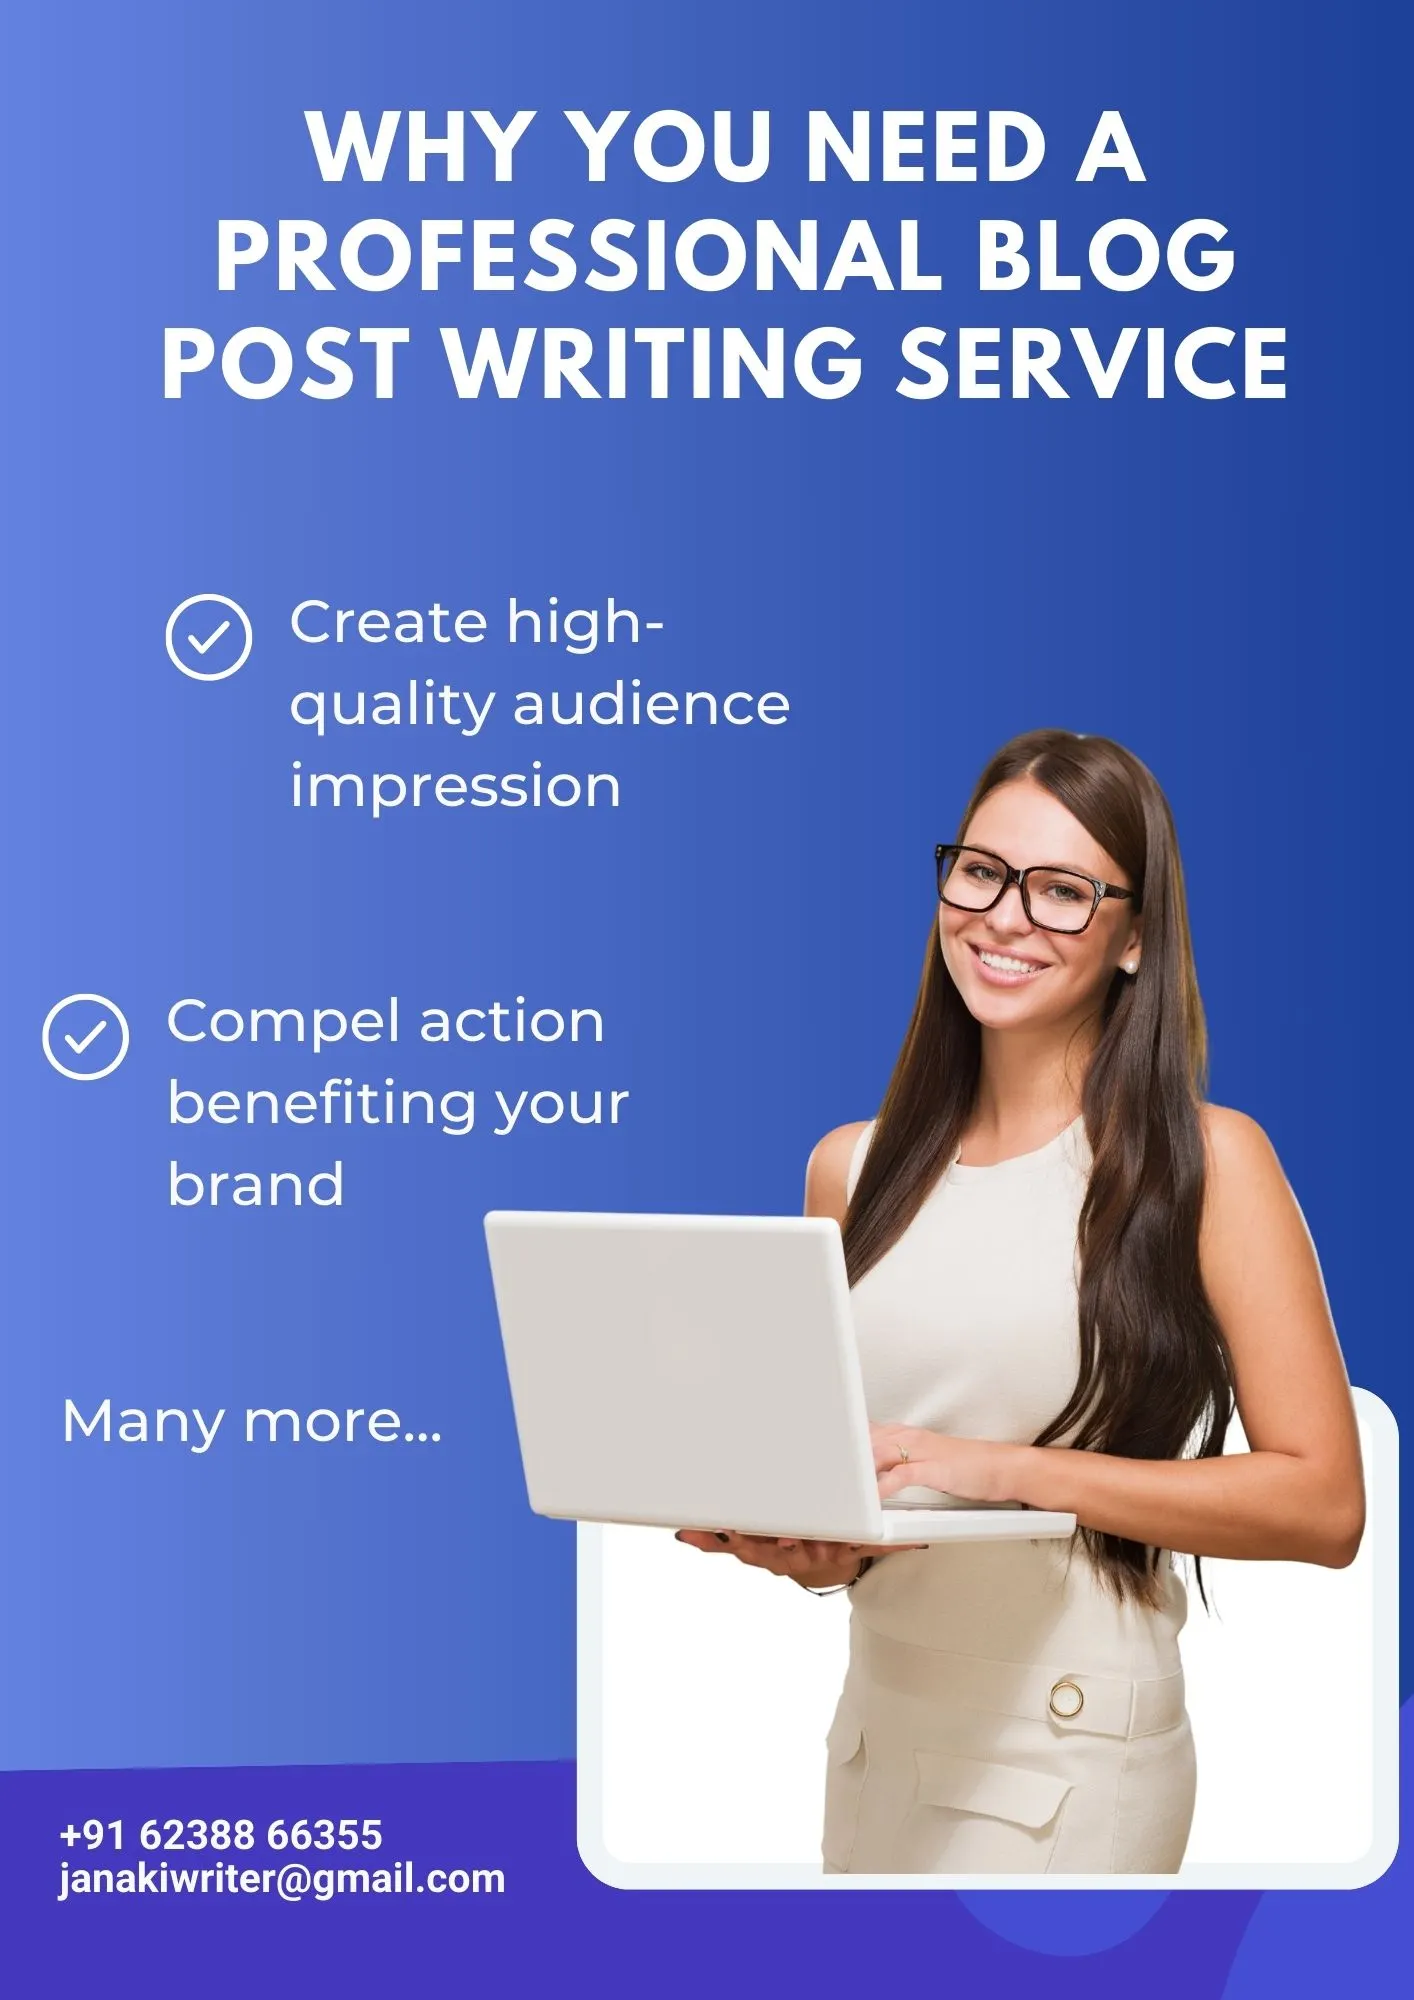 Are you need a Blog Writing Service